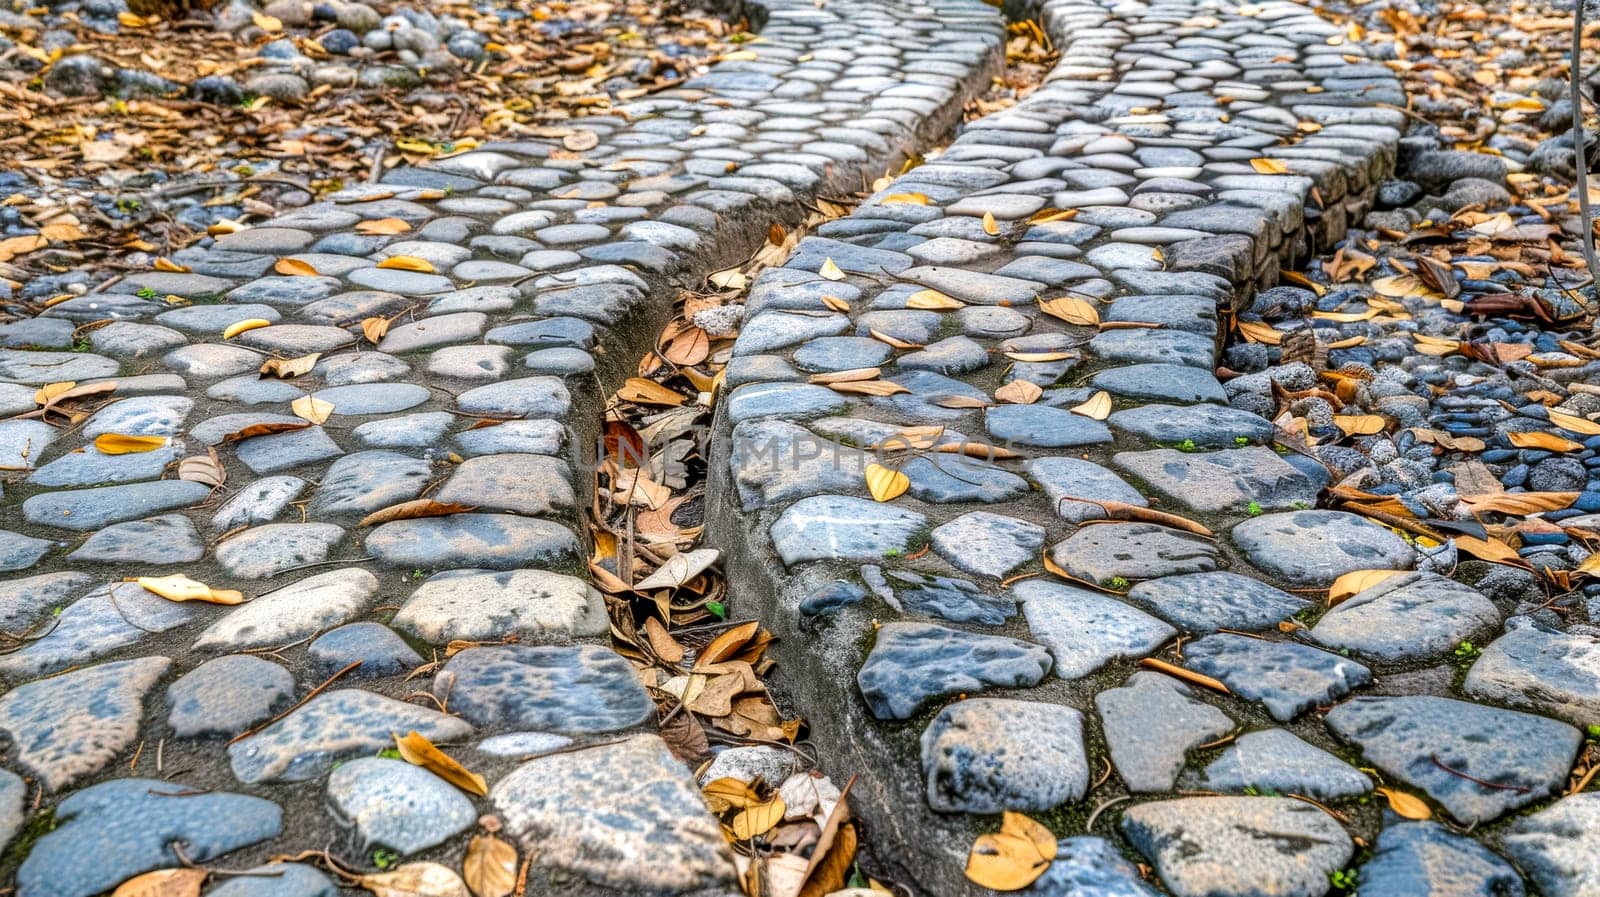 Cobblestone paths with autumn leaves by Edophoto